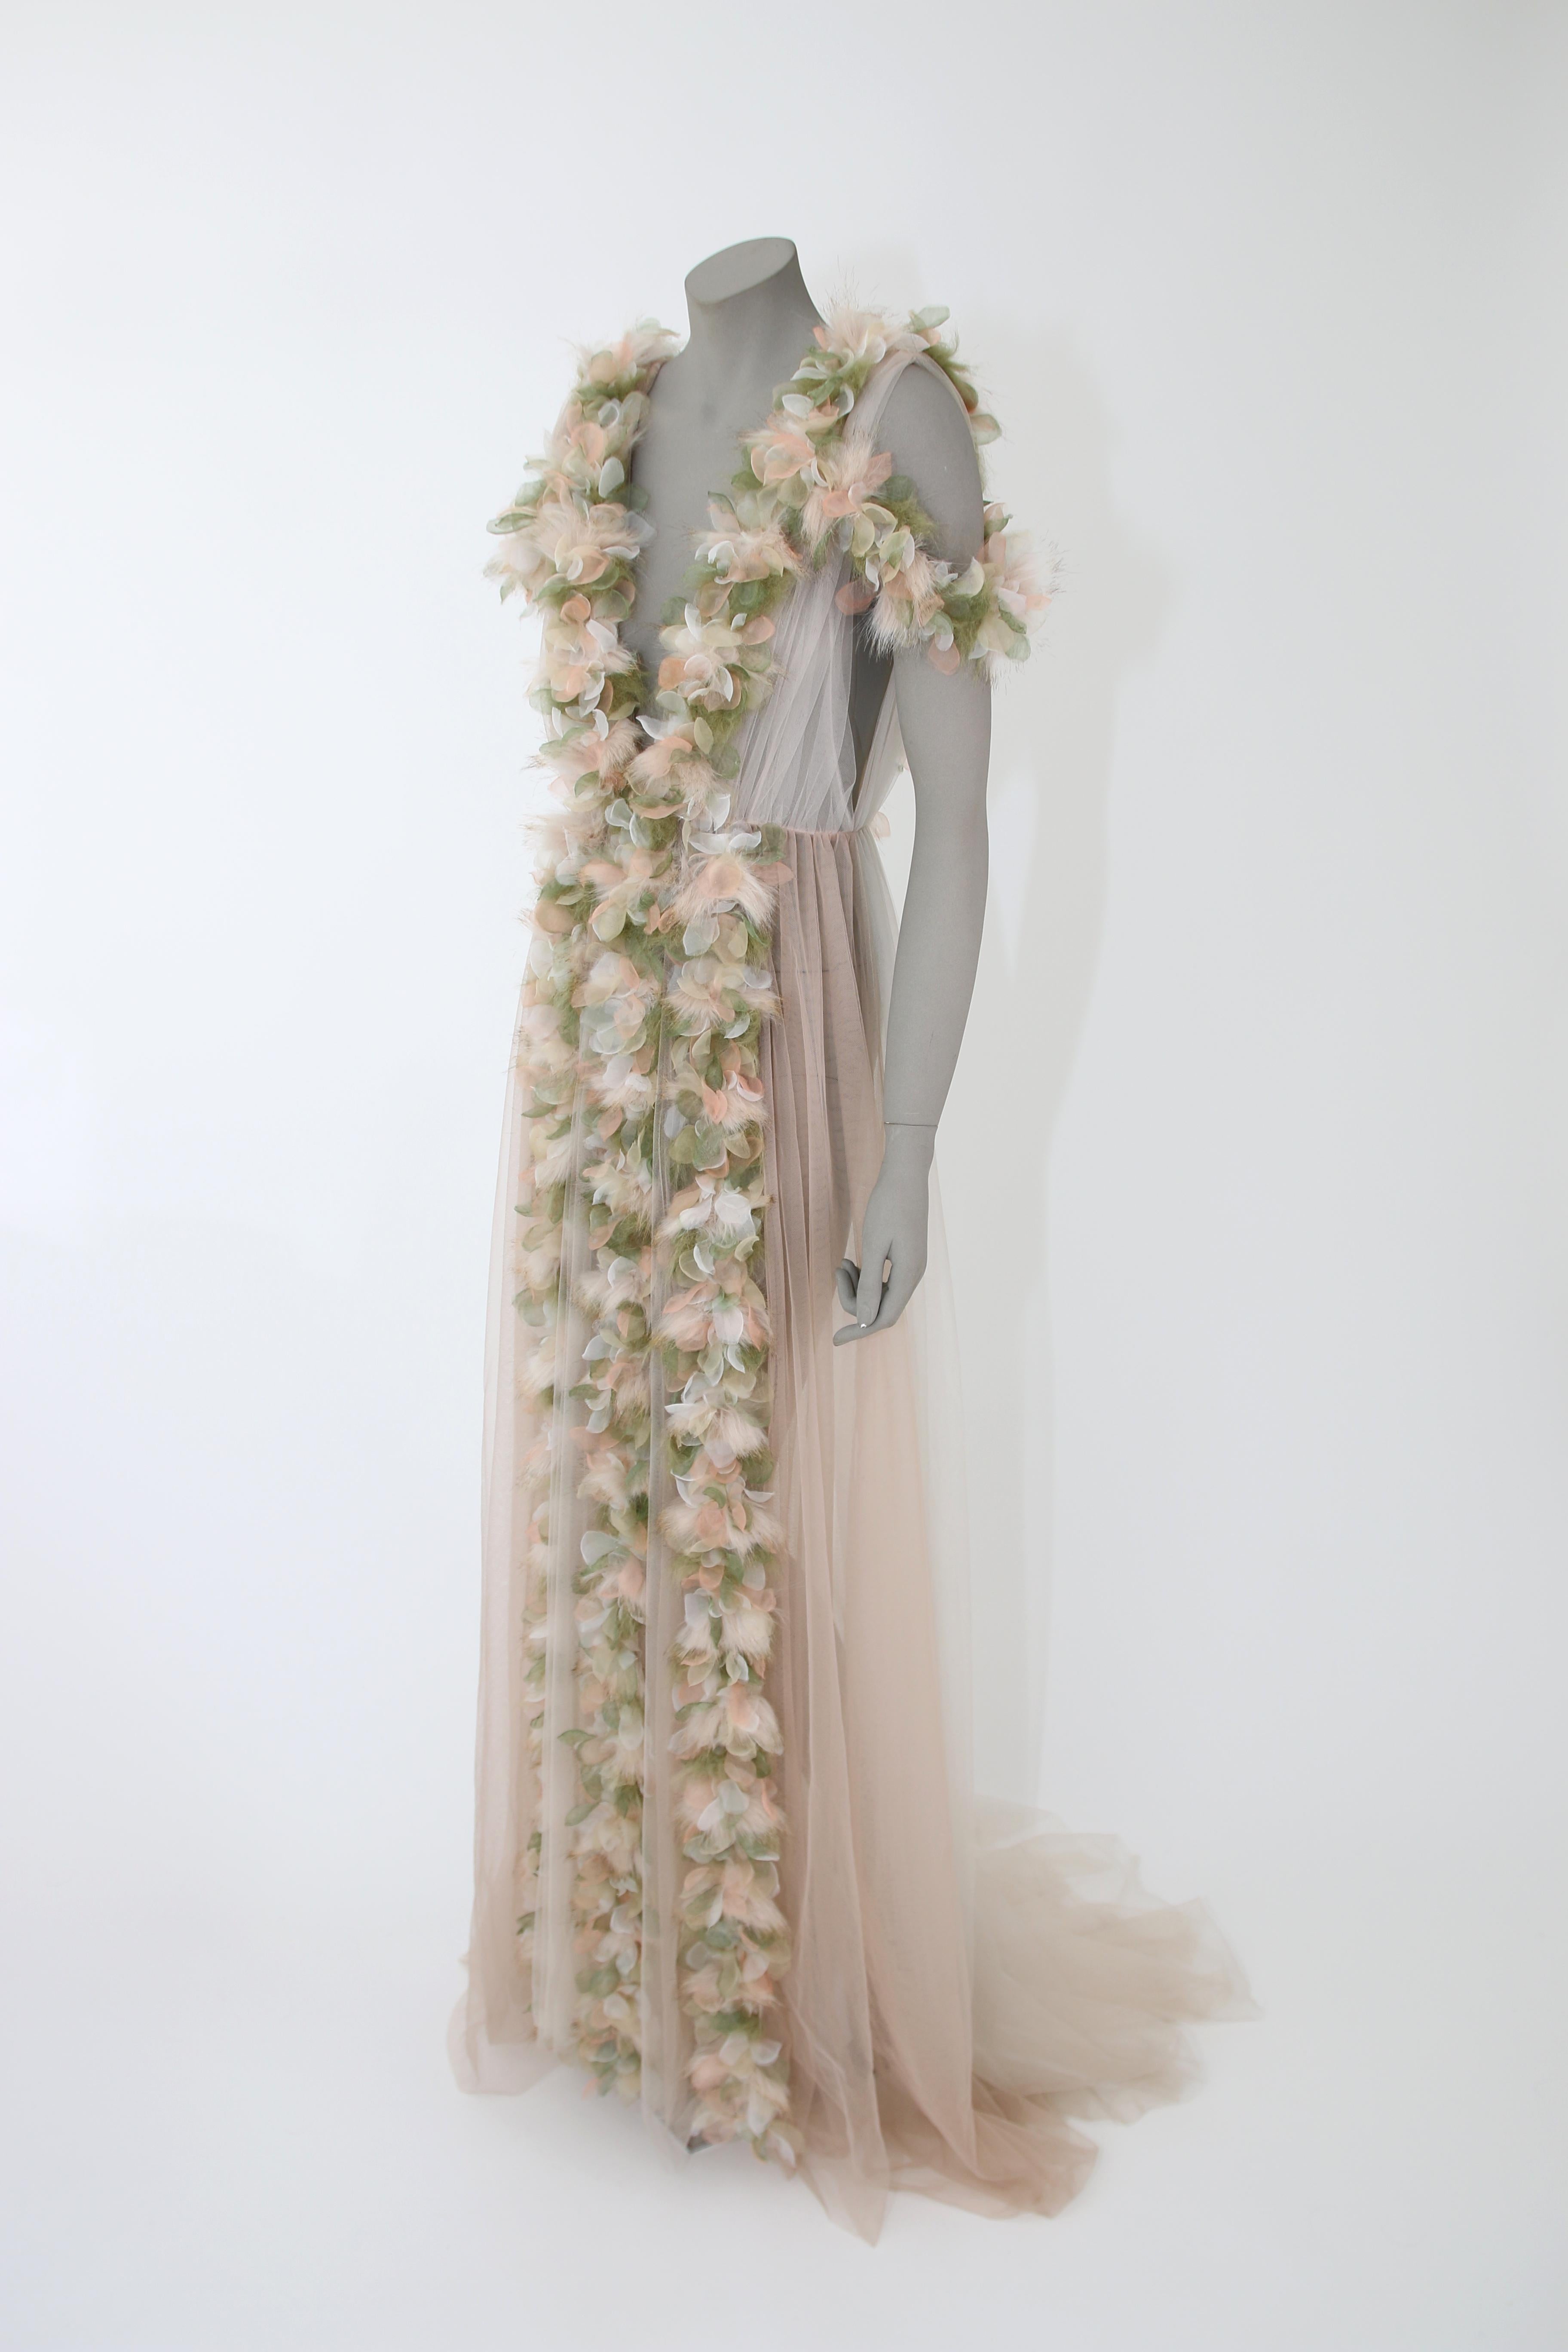 The Angelika Pelush champagne tulle dress gown with tridimensional flowers and faux feathers is a one of a kind exclusive piece. Adorned with romantic botanical tulle leaves in soft peach and green, this etherial dress is detailed with tiny inlay